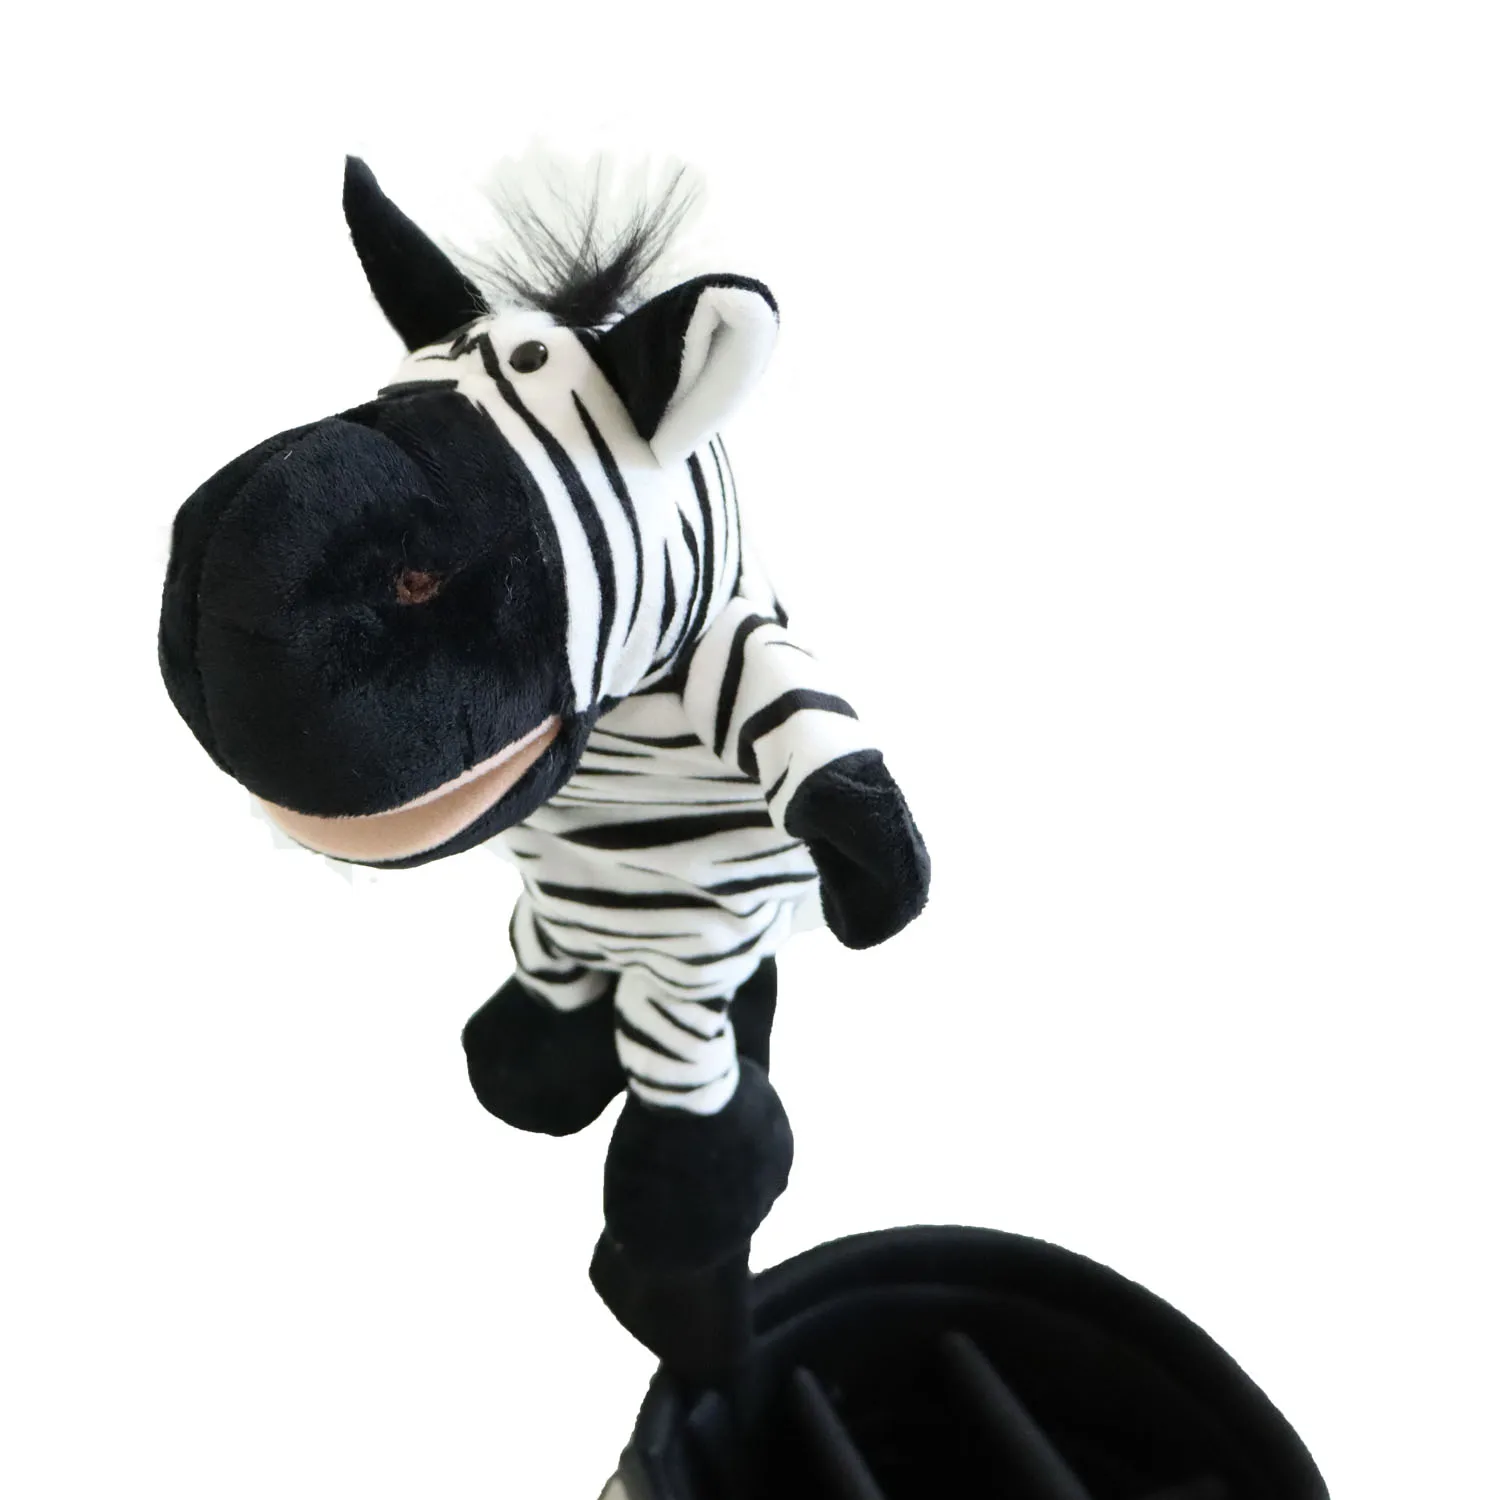 

Animal Golf Headcovers for Driver 460cc Fairway Suitable for Men Lady Golf Club Cover Horse Donkey Mascot Novelty Cute Gift